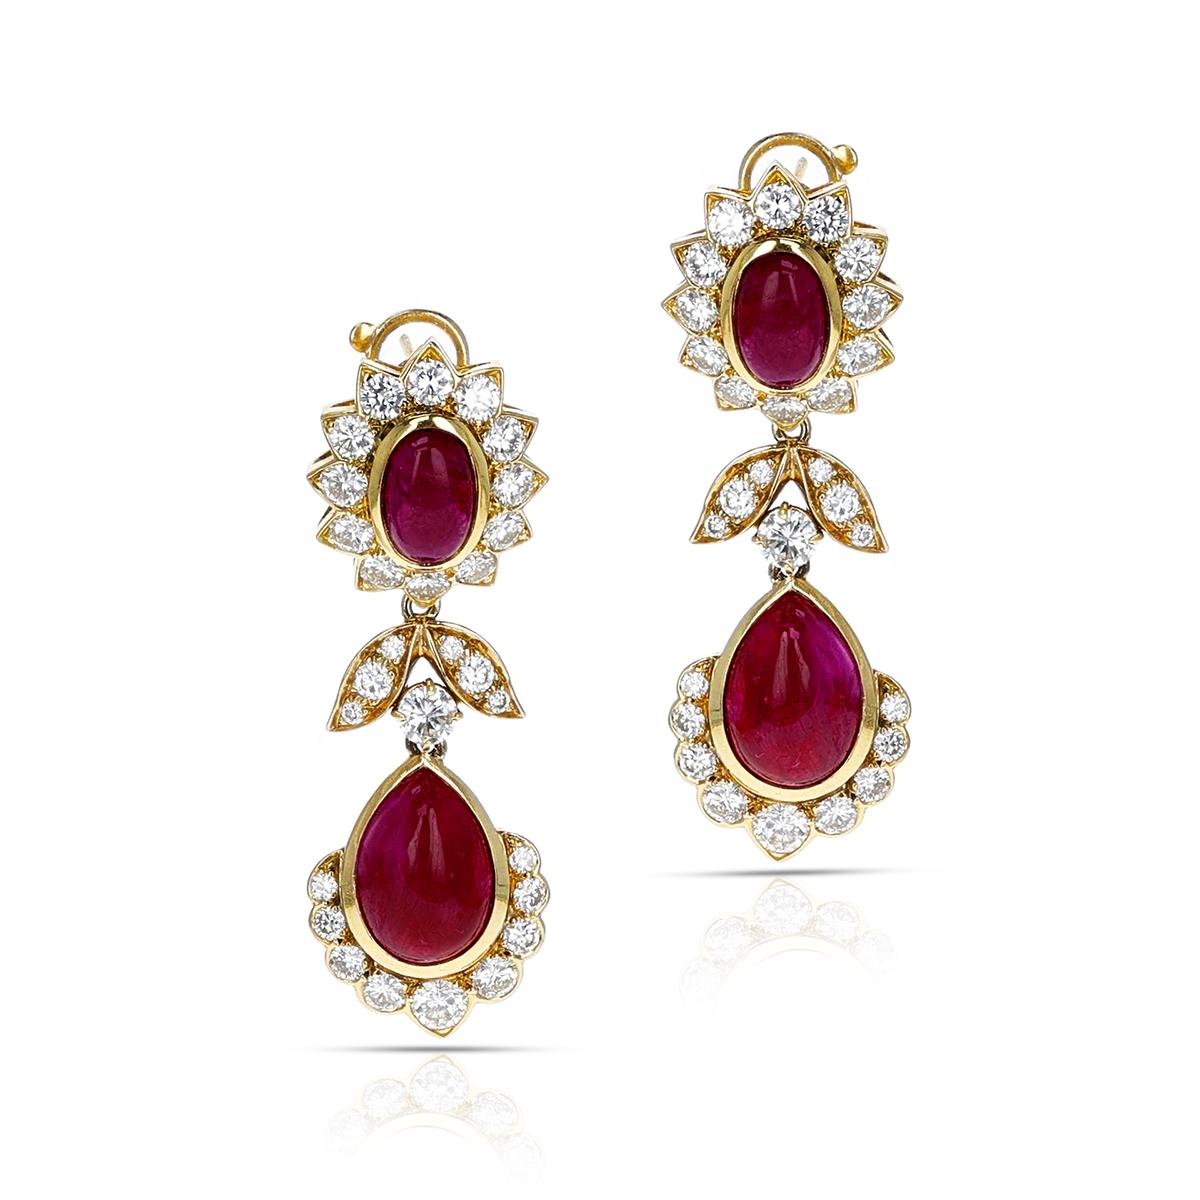 A stunning pair of Van Cleef & Arpels Ruby Oval and Pear Cabochon Dangling Earrings with Diamonds made in 18 Karat Yellow gold. The earrings have a post in the back as well. The length of the earring is 1.75 inches. The total weight of the earring